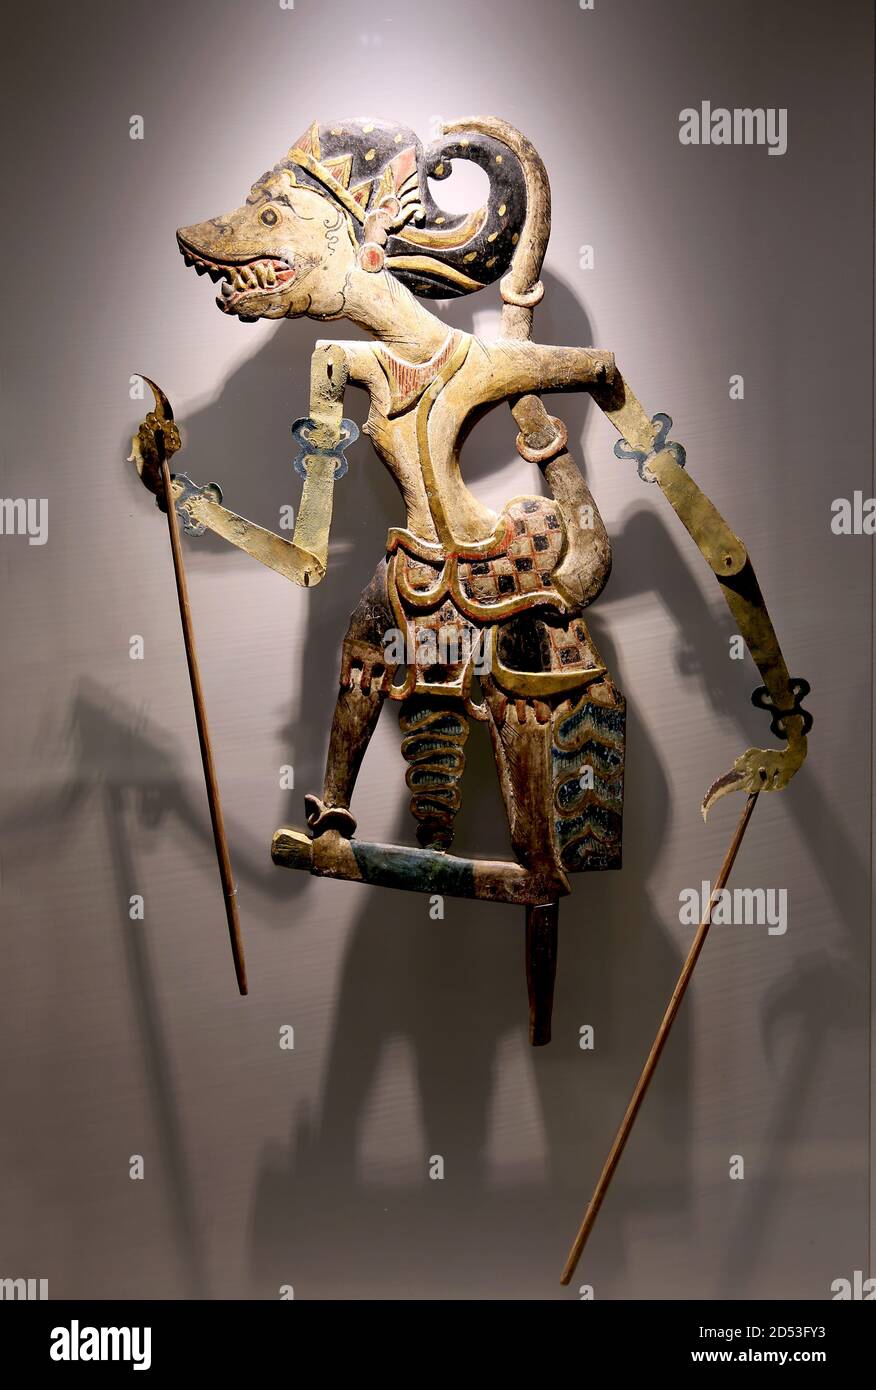 Shadow puppet depicting Hanuman (19th-20th cent.) wayang klitic. Painted wood. Java Island, Indonesia. World Cultures, Barcelona Stock Photo